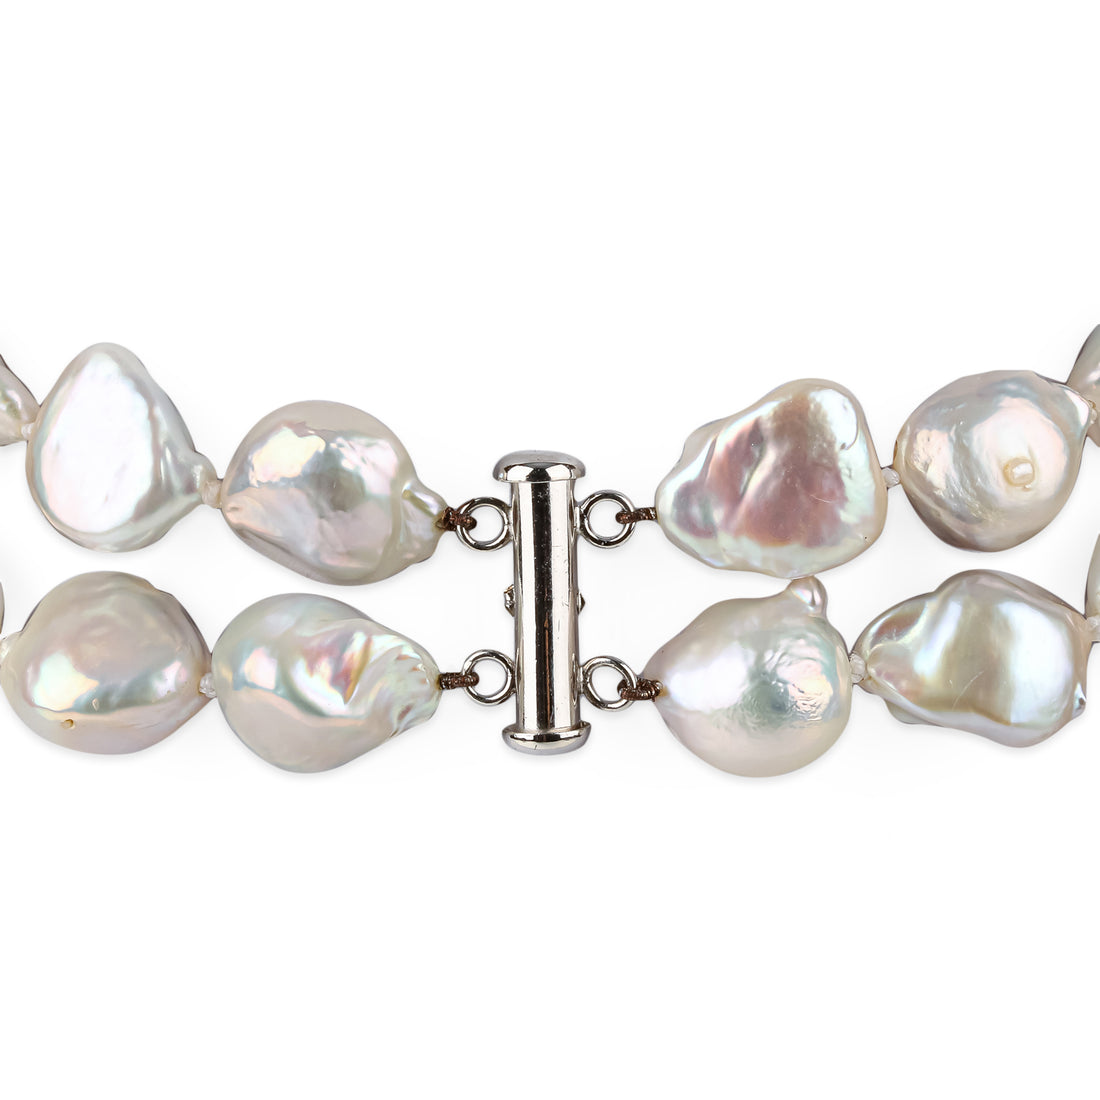 2-Strand Baroque Freshwater Pearl Necklace